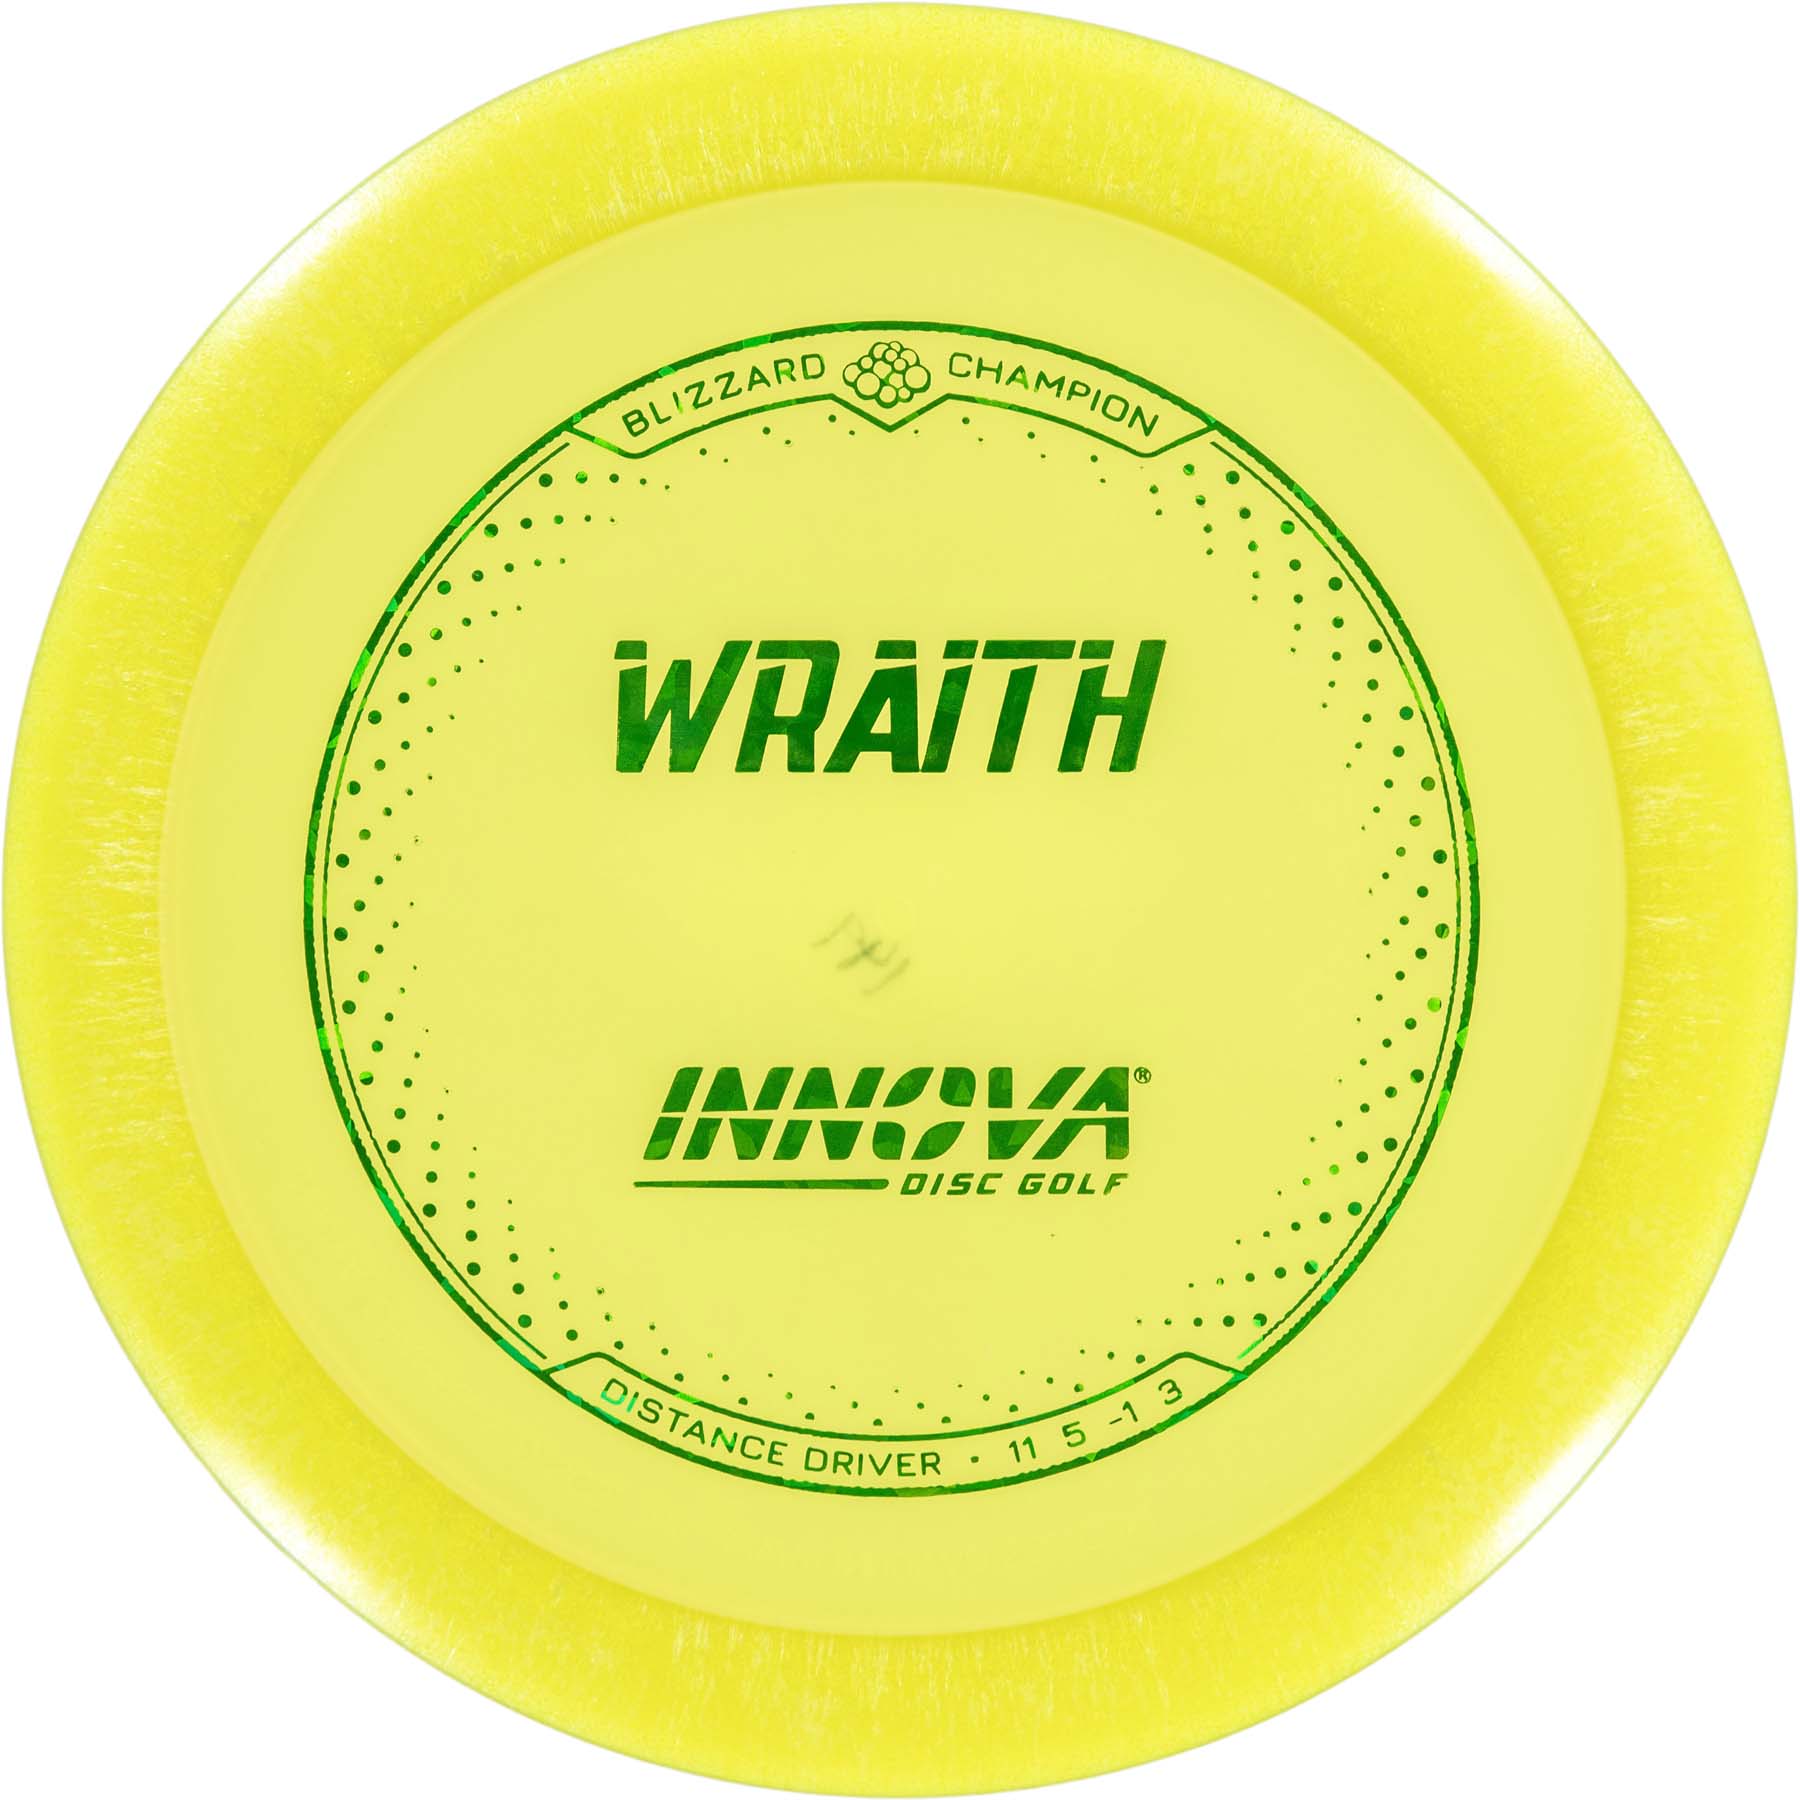 Blizzard Champion Wraith from Disc Golf United